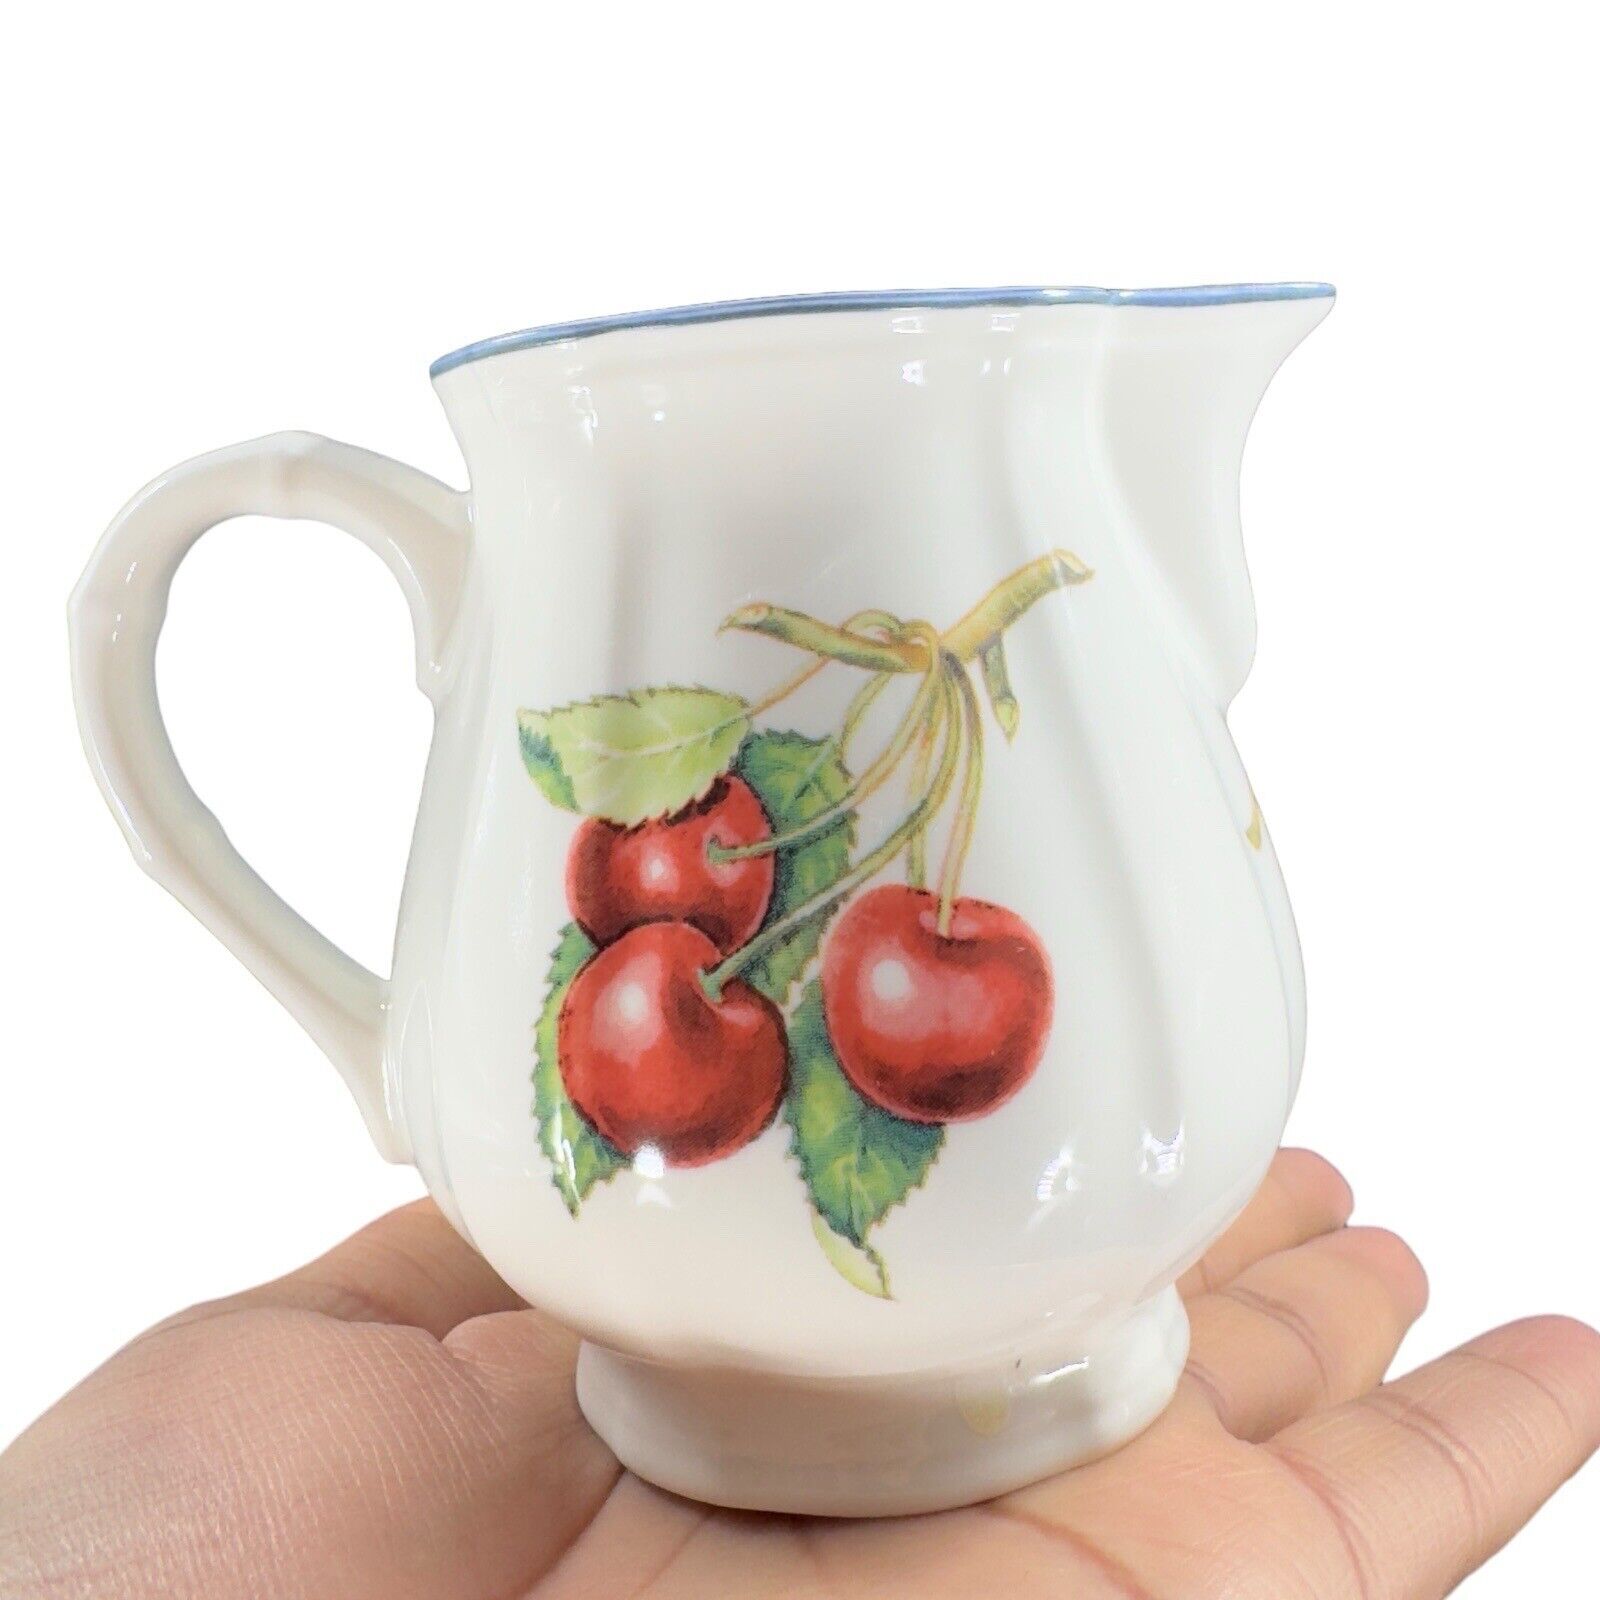 Villeroy & Boch Cottage Creamer Small Pitcher Ceramic Porcelain Made In Germany